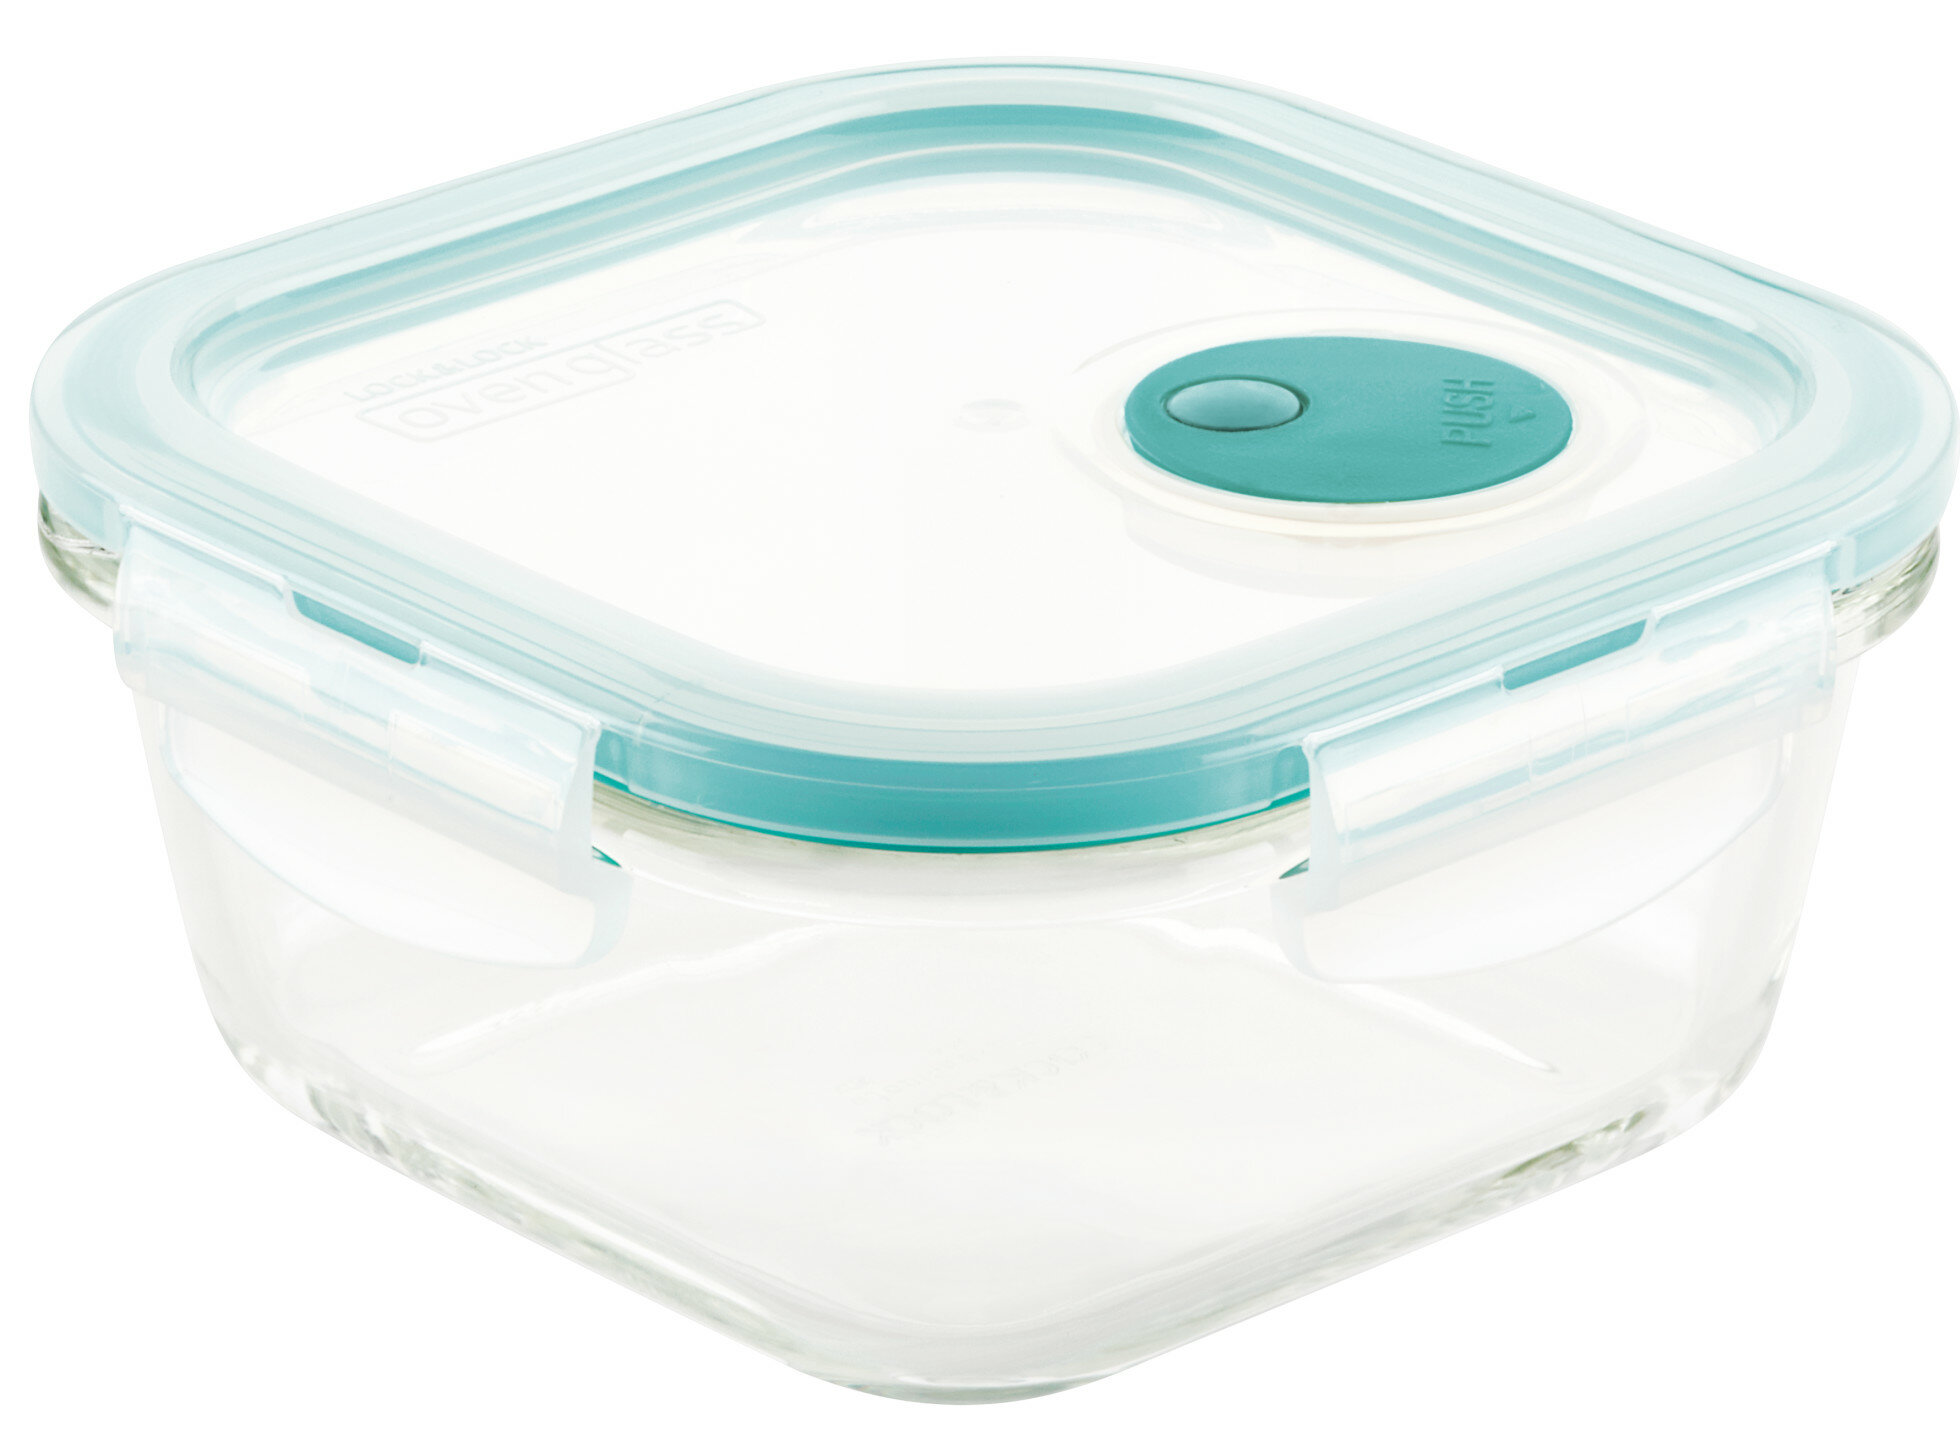 Oven-Safe Glass Meal Prep Containers with Vented & Locking Lids